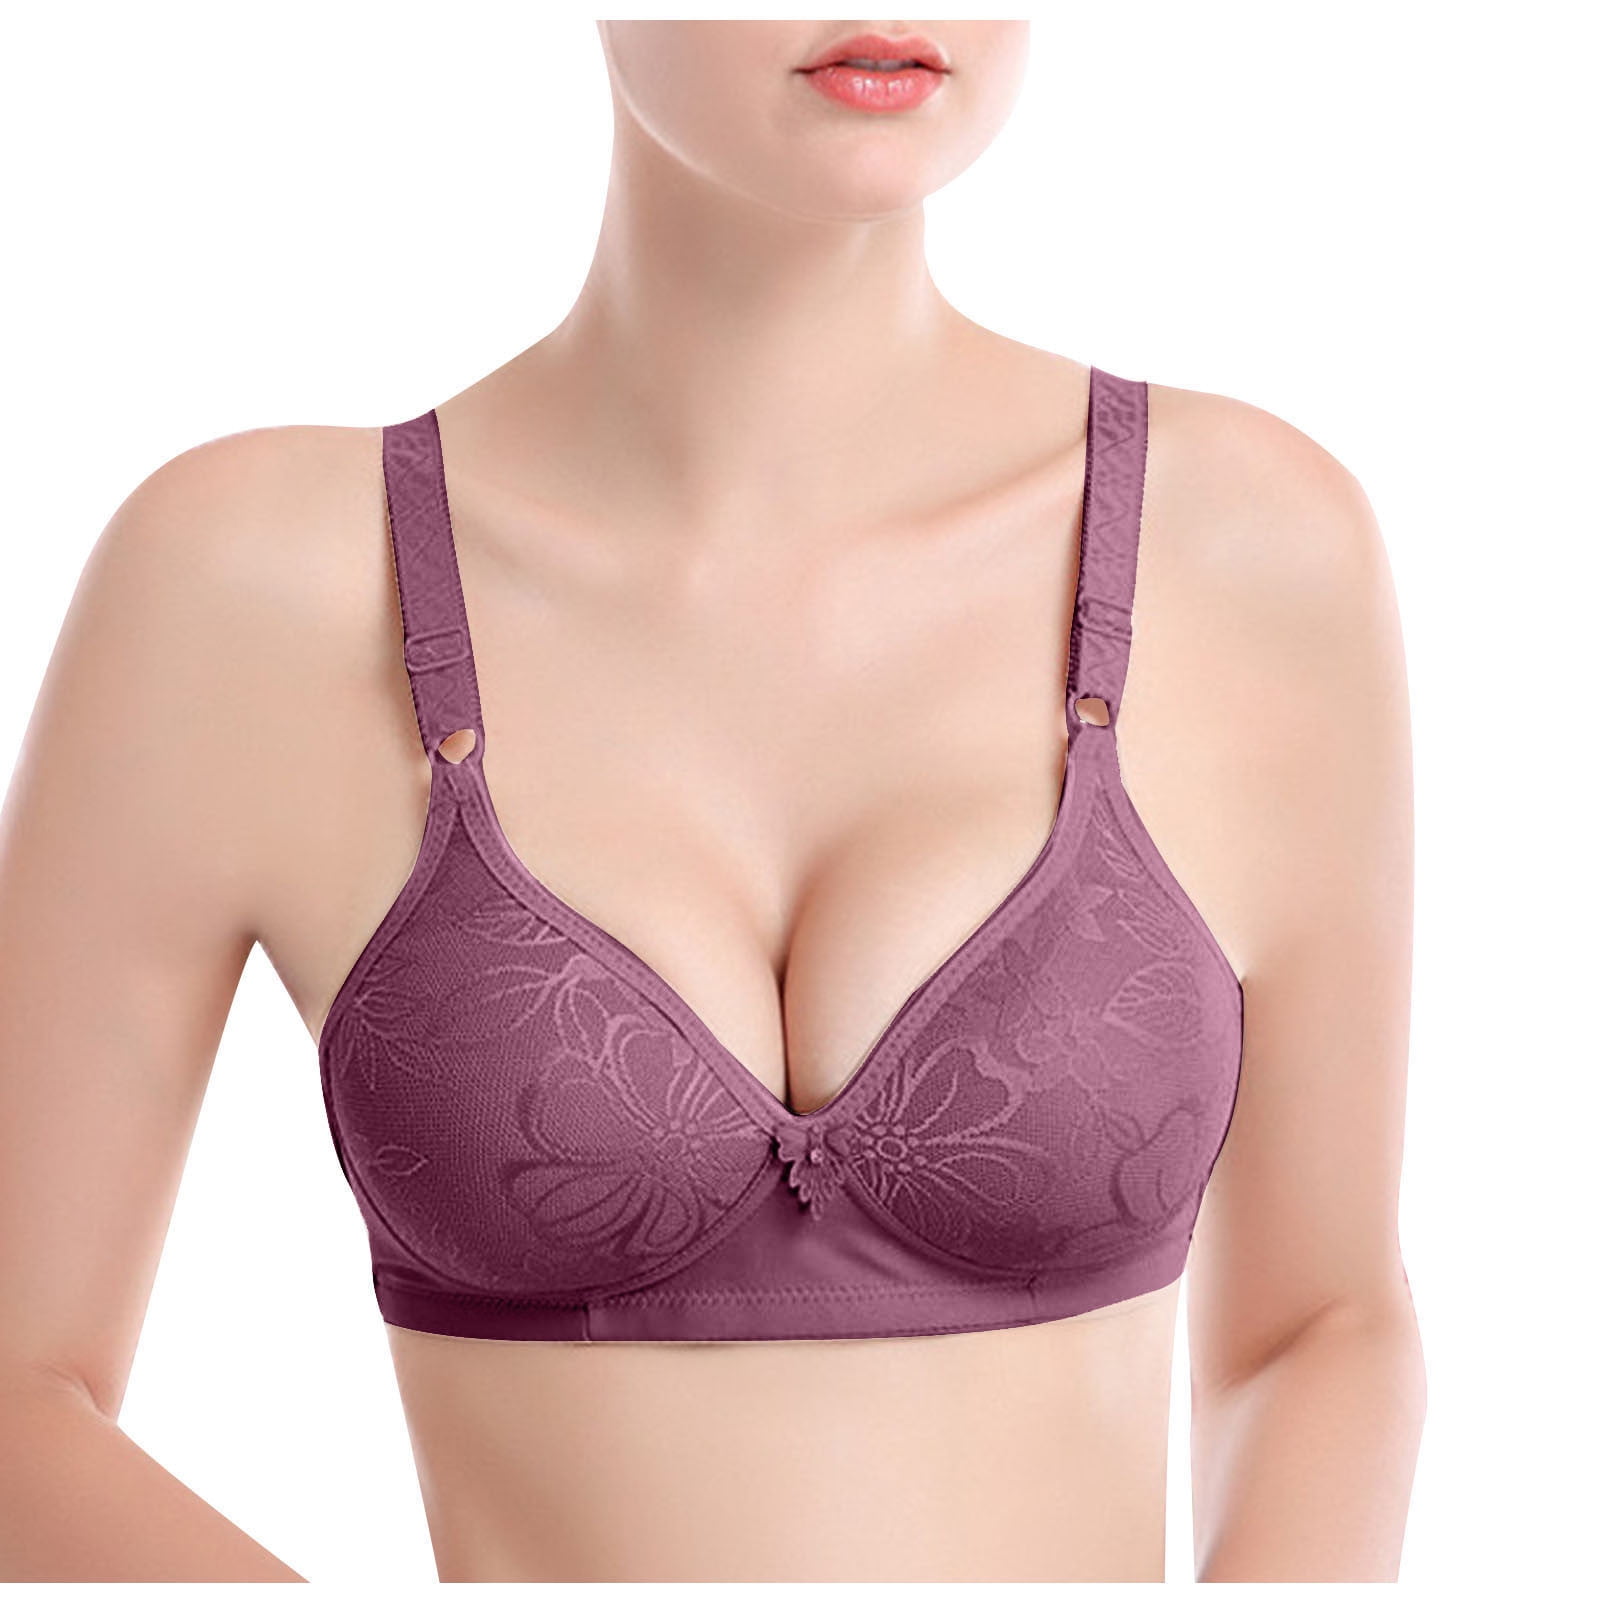 TAIAOJING Push Up Bras for Women Underwear For Push Up Adjustable